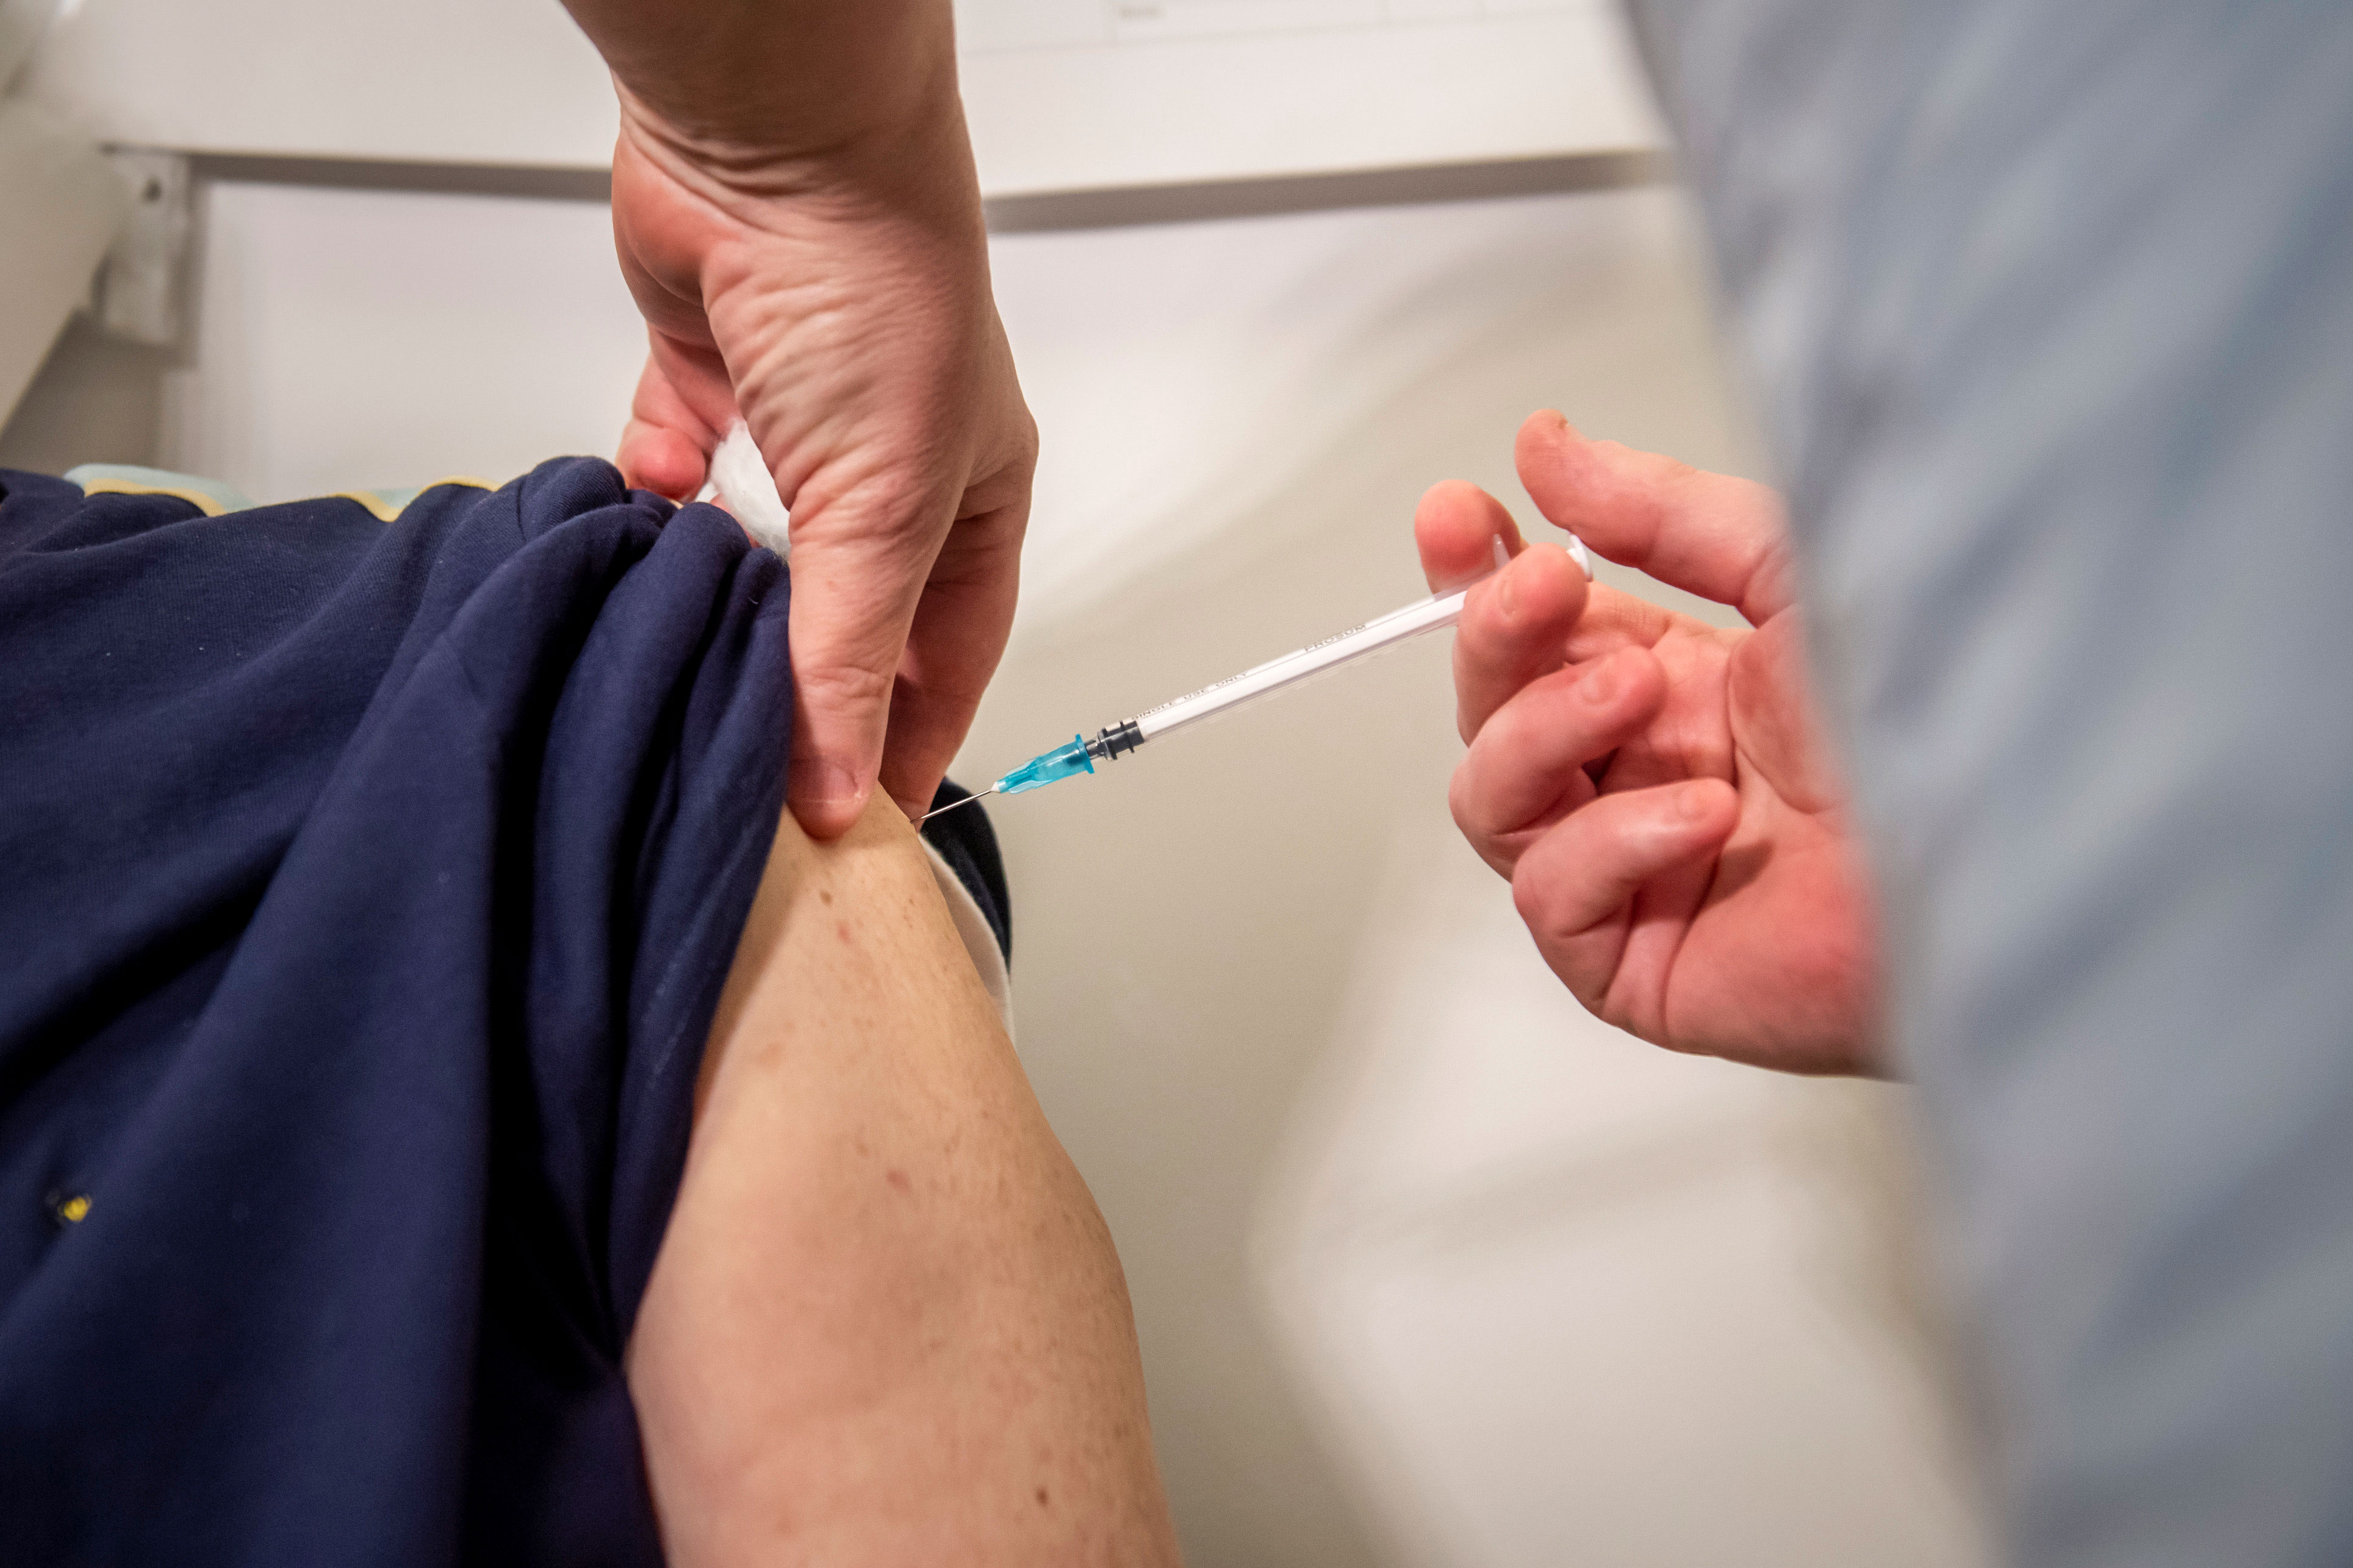 A person receives the Pfizer/BioNTech Covid-19 vaccine on January 11 in Oldham, England.